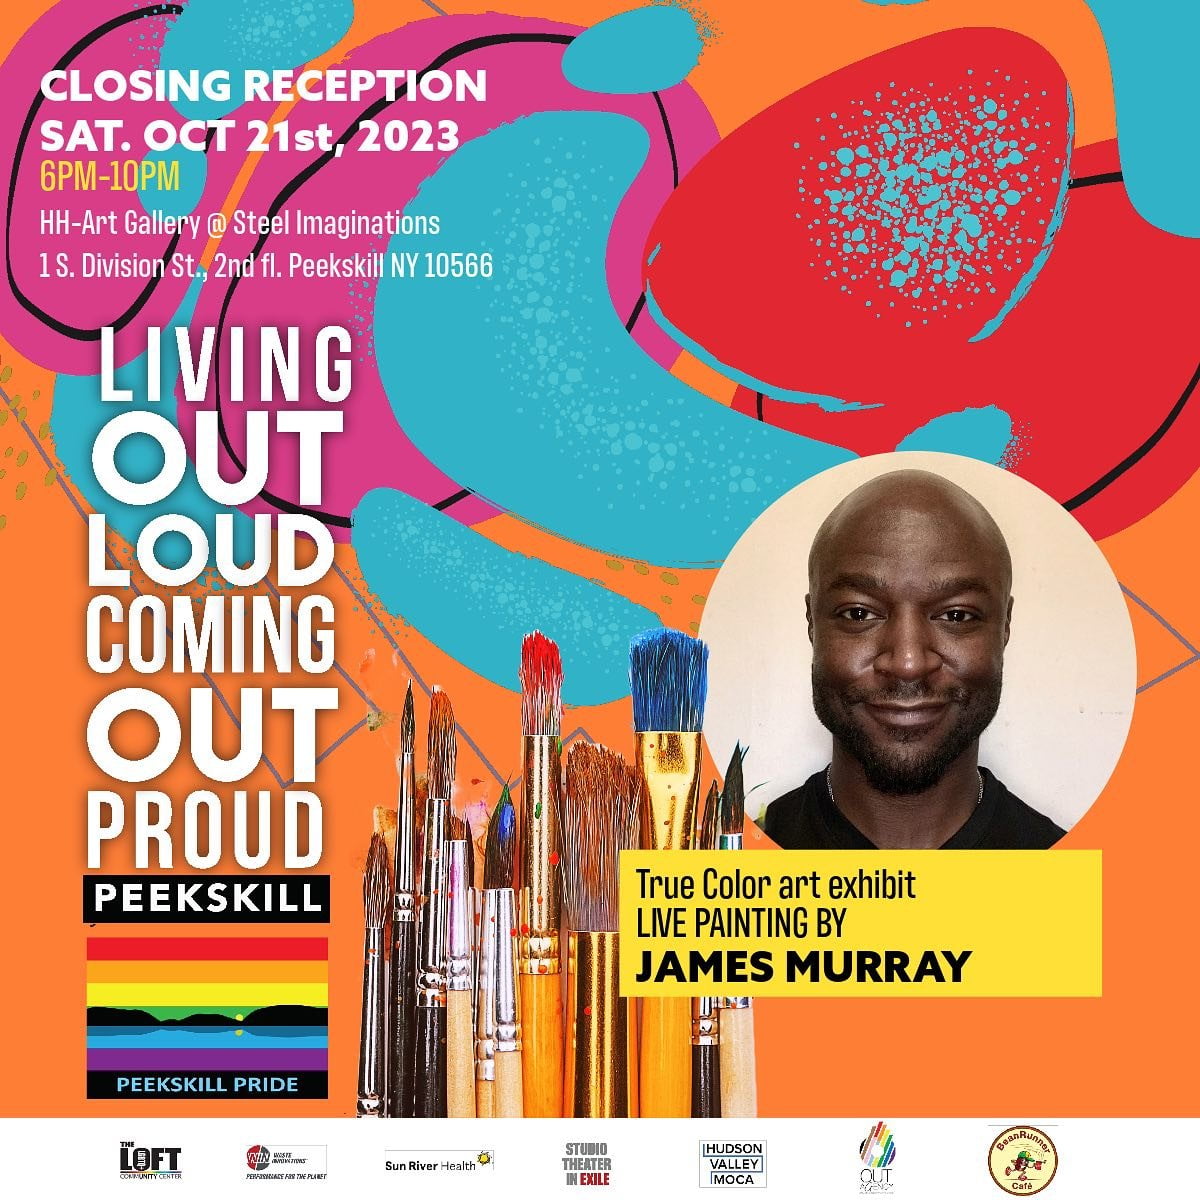 Flier for Living Out Loud art exhibit with James Murray